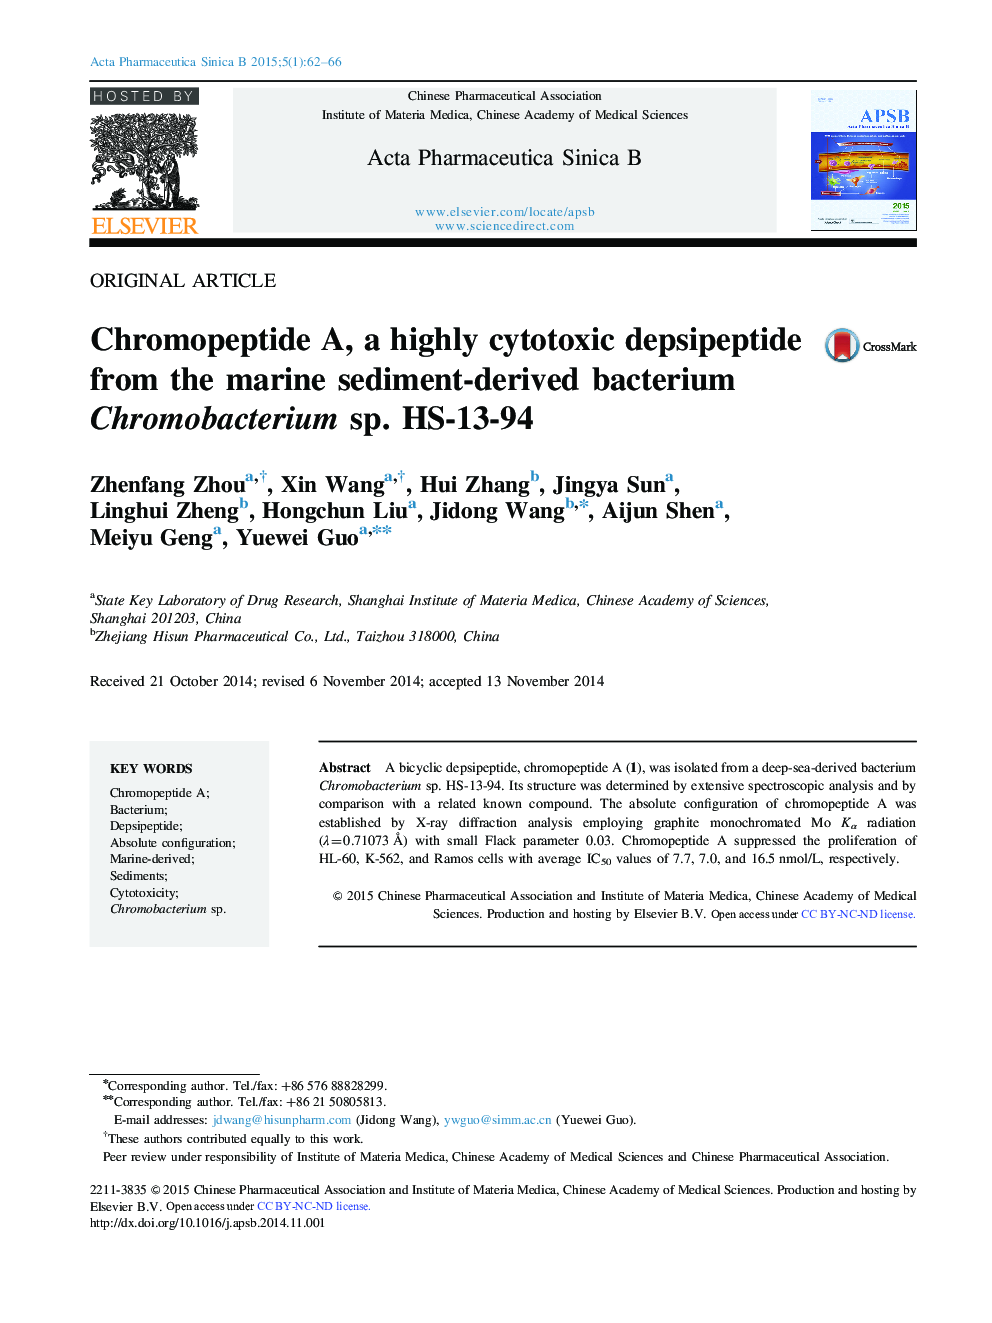 Chromopeptide A, a highly cytotoxic depsipeptide from the marine sediment-derived bacterium Chromobacterium sp. HS-13-94 